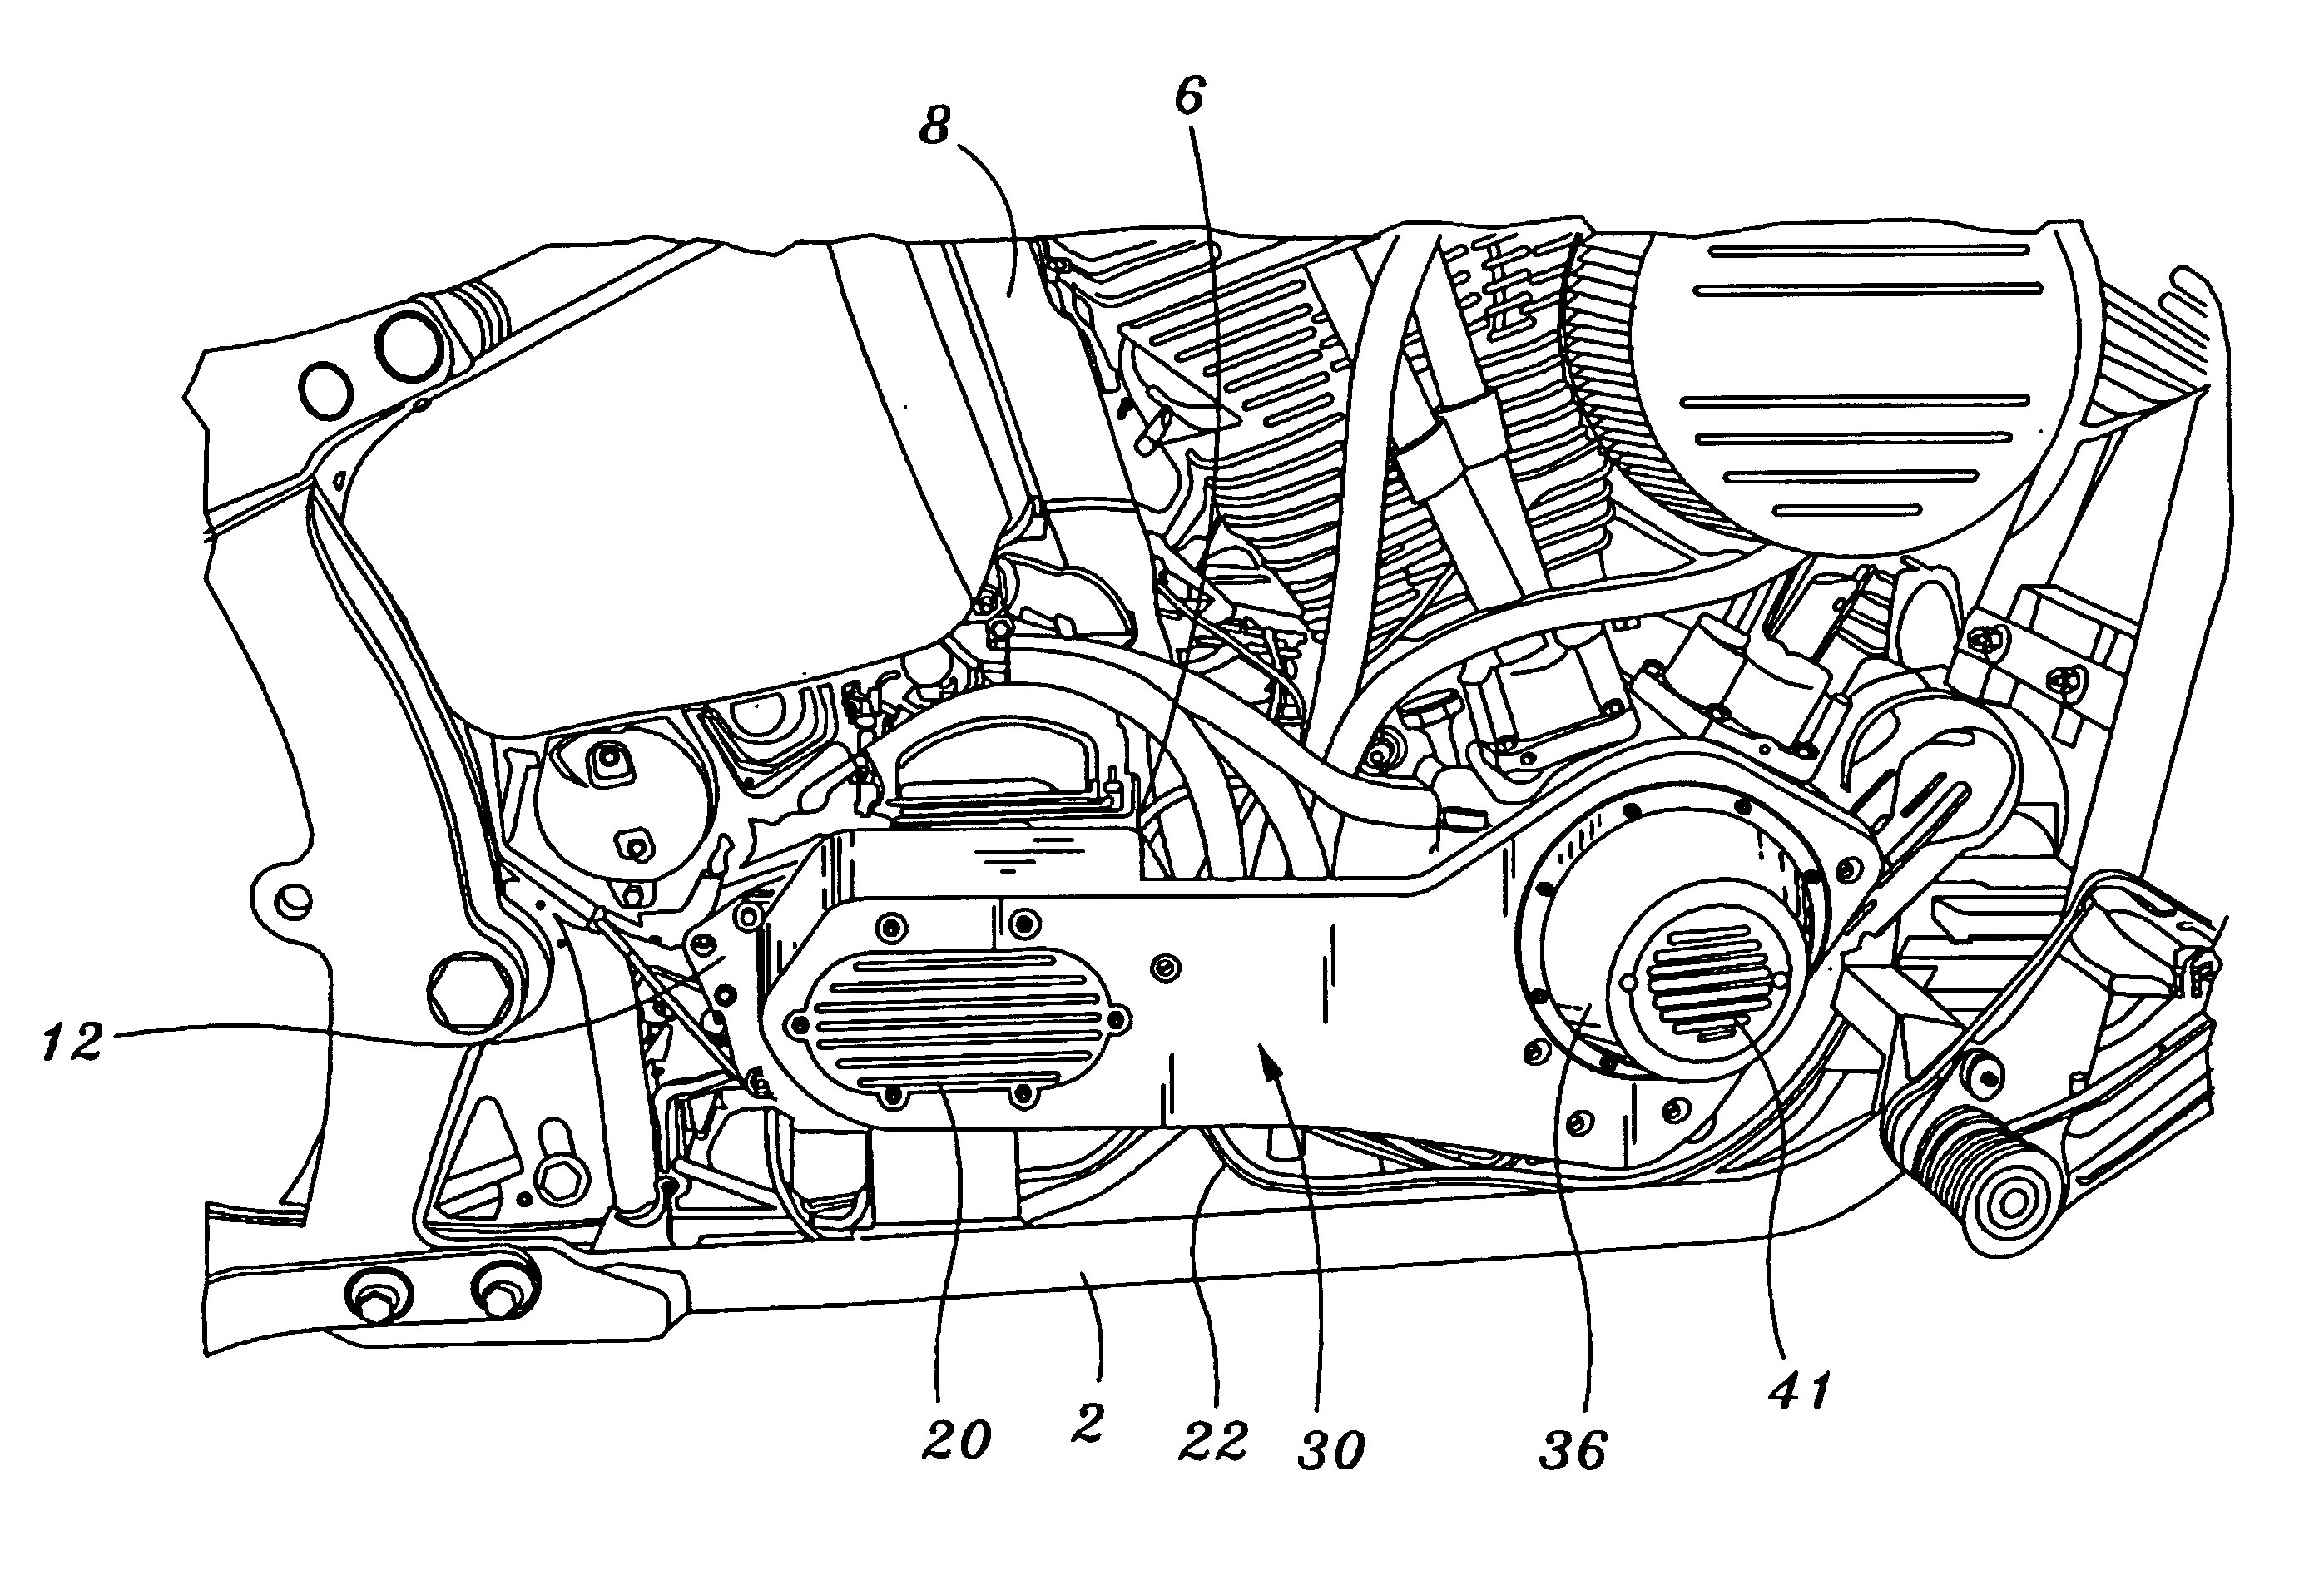 Motorcycle engine and transmission interbracing member